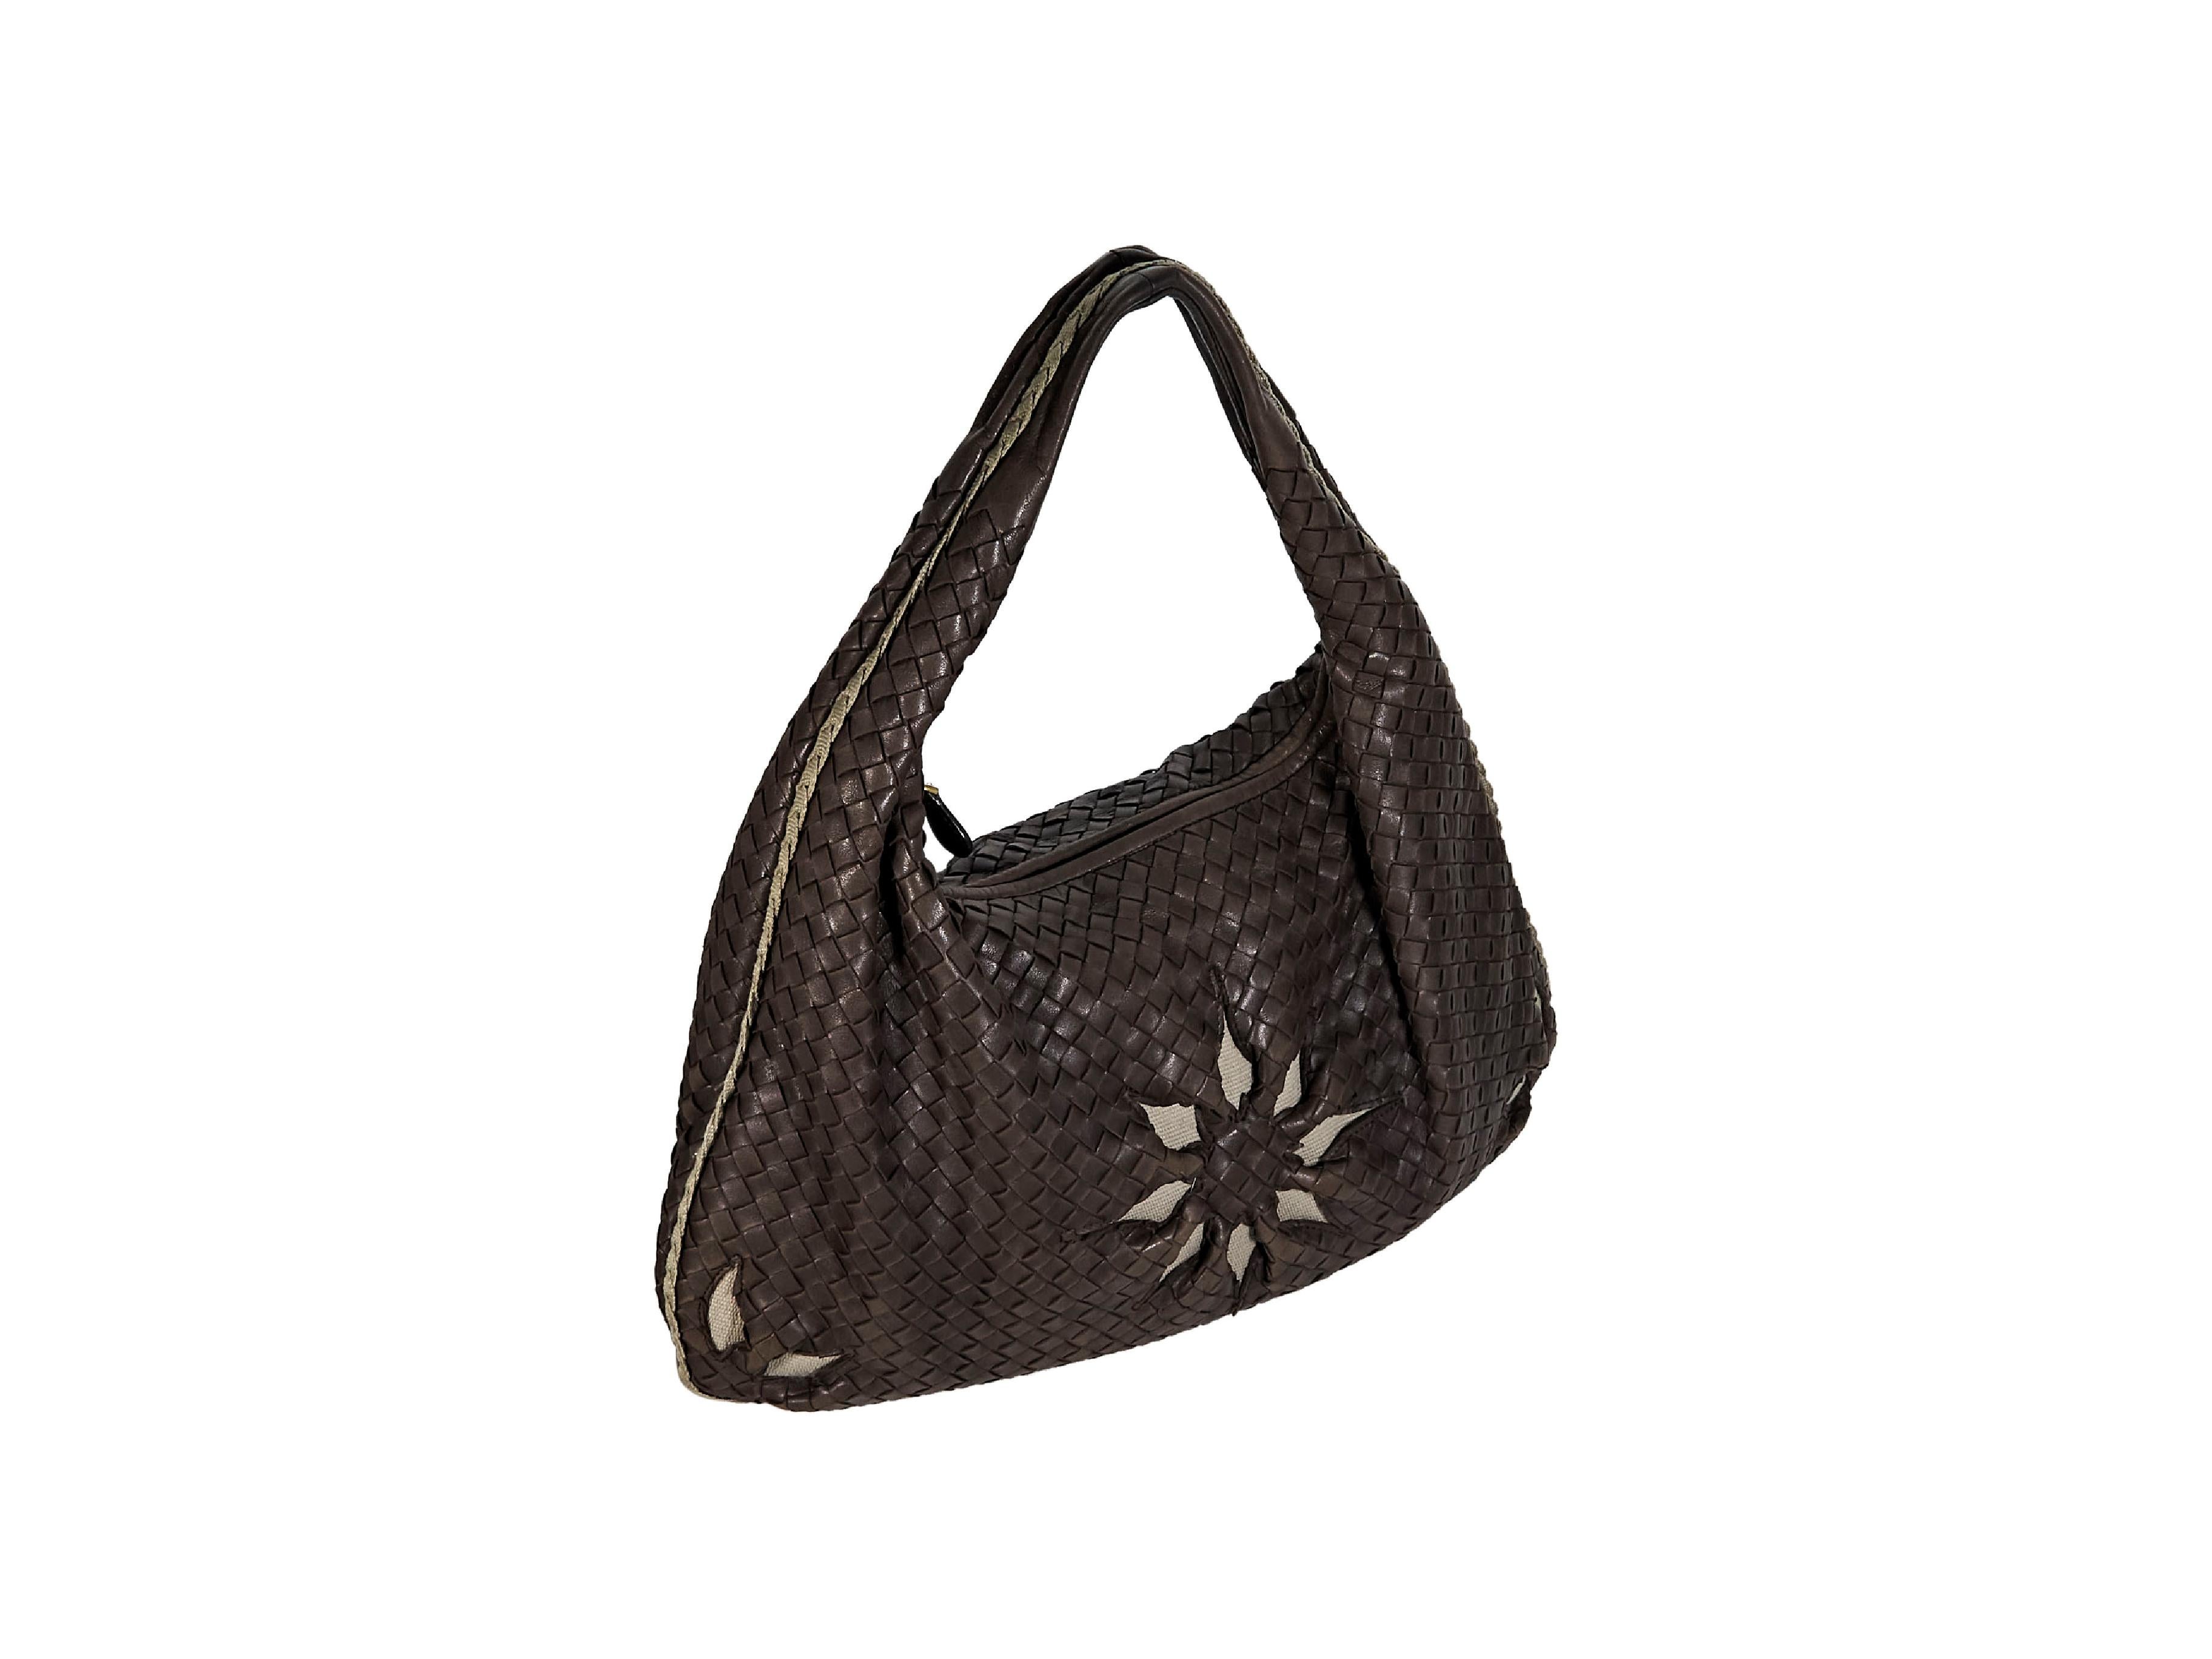 Product details:  Brown intrecciato leather hobo bag by Bottega Veneta.  Floral design with peek-a-boo lining.  Single shoulder strap.  Top zip closure.  Lined interior with inner zip pocket.  Goldtone hardware.  17.5